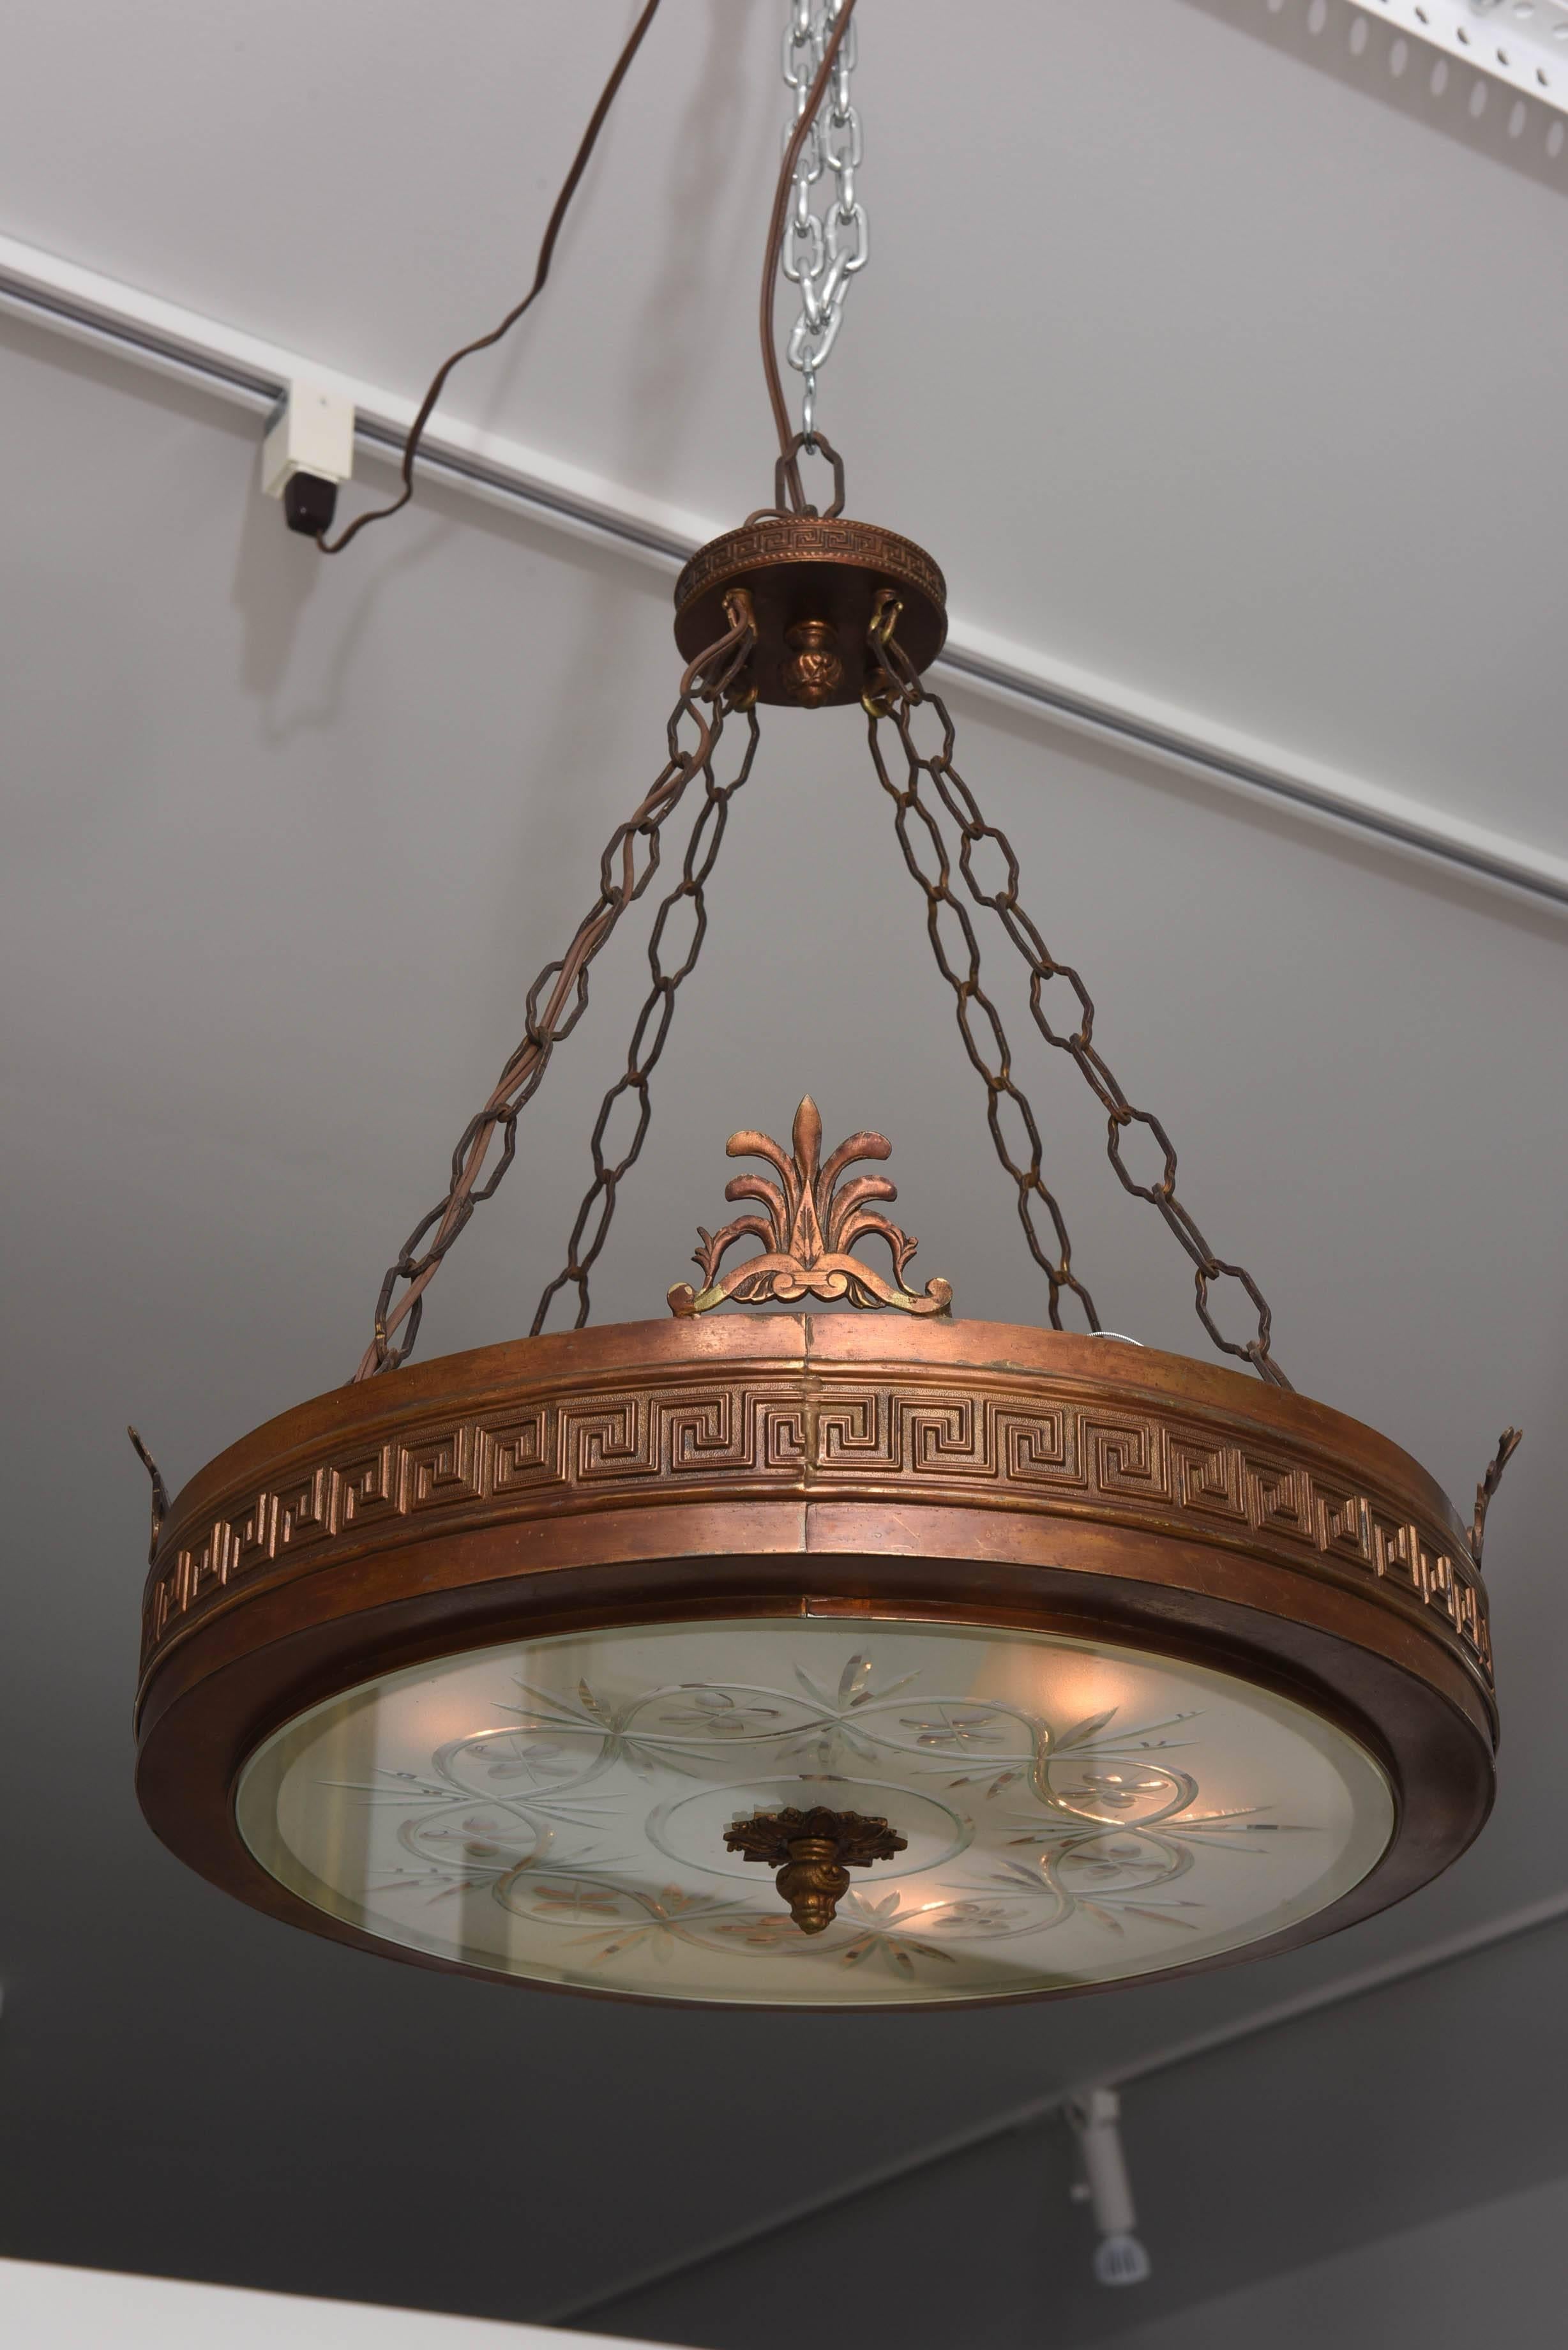 This handsome chandelier dates from the 1920s and is fabricated of cast bronze and a central glass-diffuser with cut and frosted details. The main frame is detailed with a Greek key border and four stylized palmettos. 

Note: This chandelier could